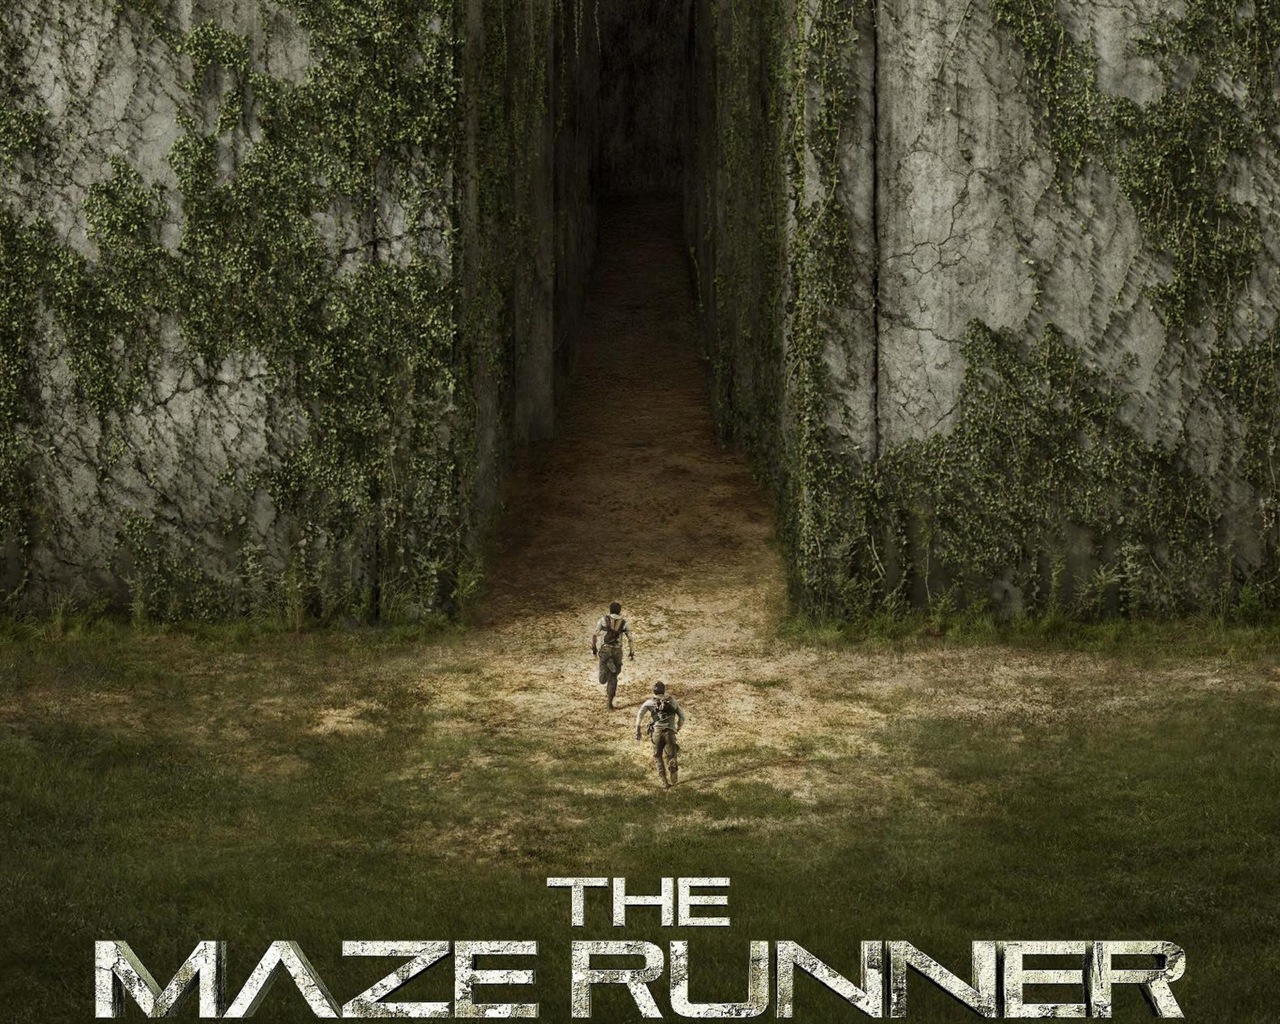 The Maze Runner HD movie wallpapers #5 - 1280x1024